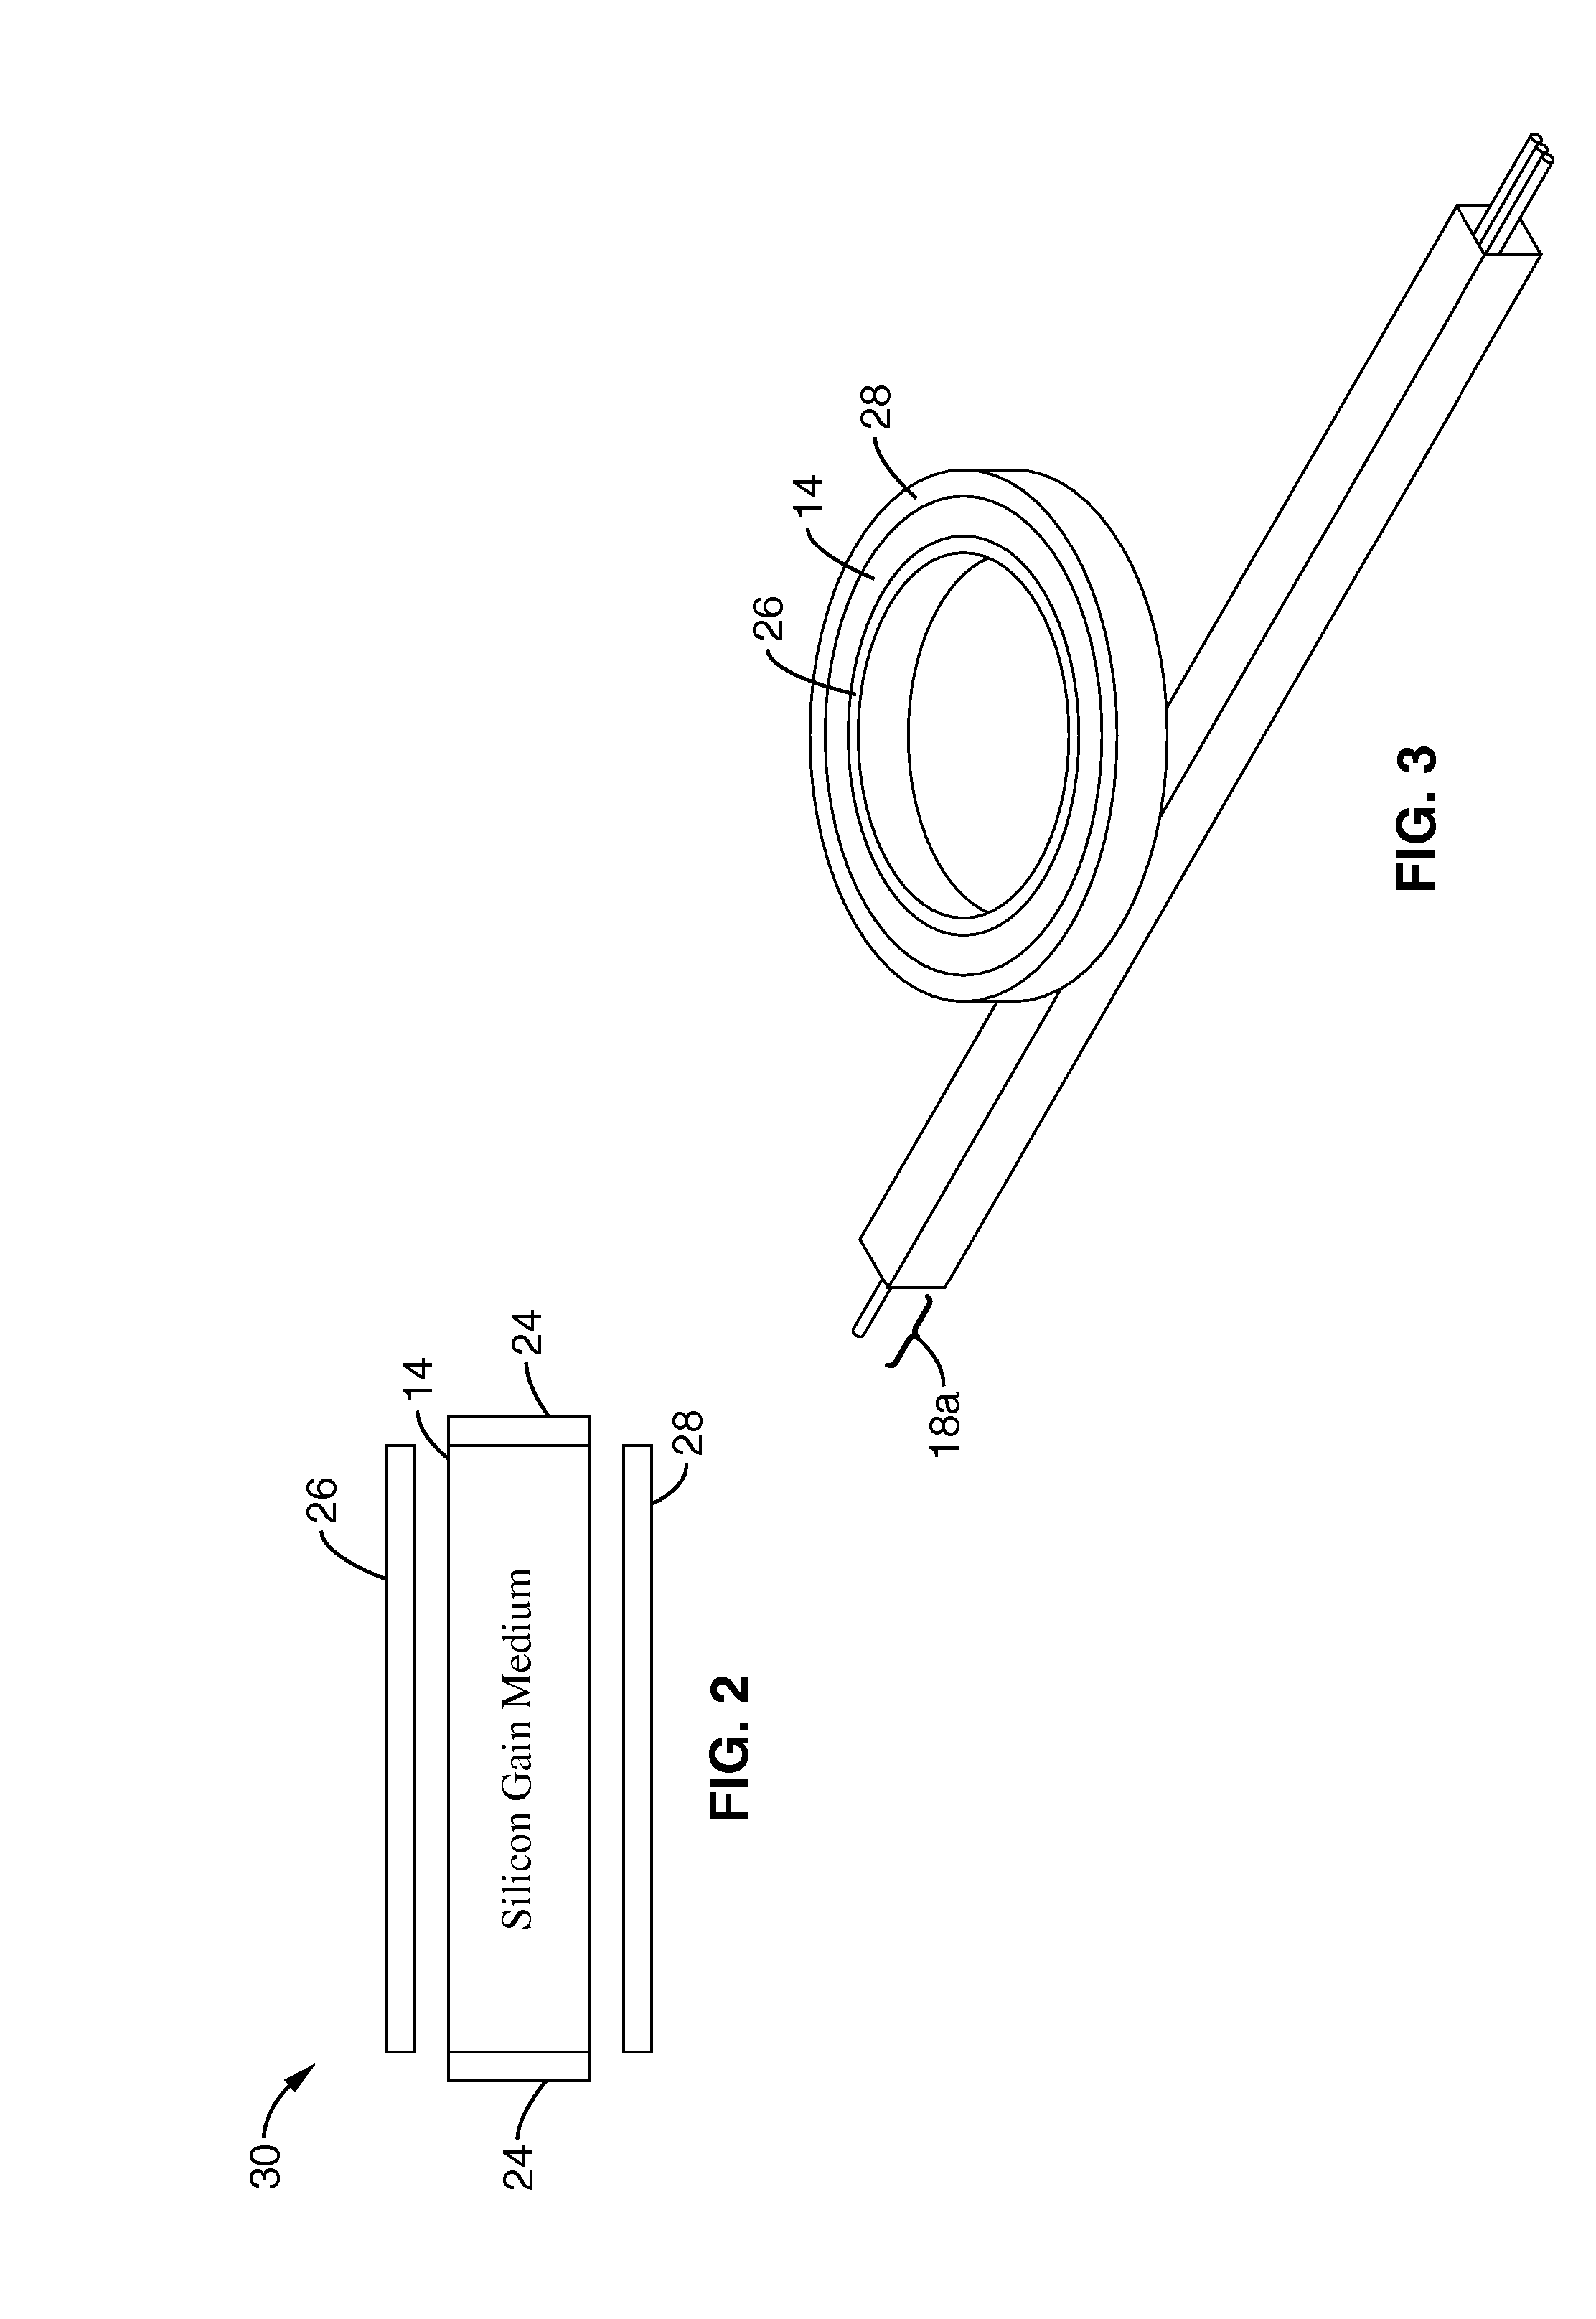 Cascaded cavity silicon raman laser with electrical modulation, switching, and active mode locking capability